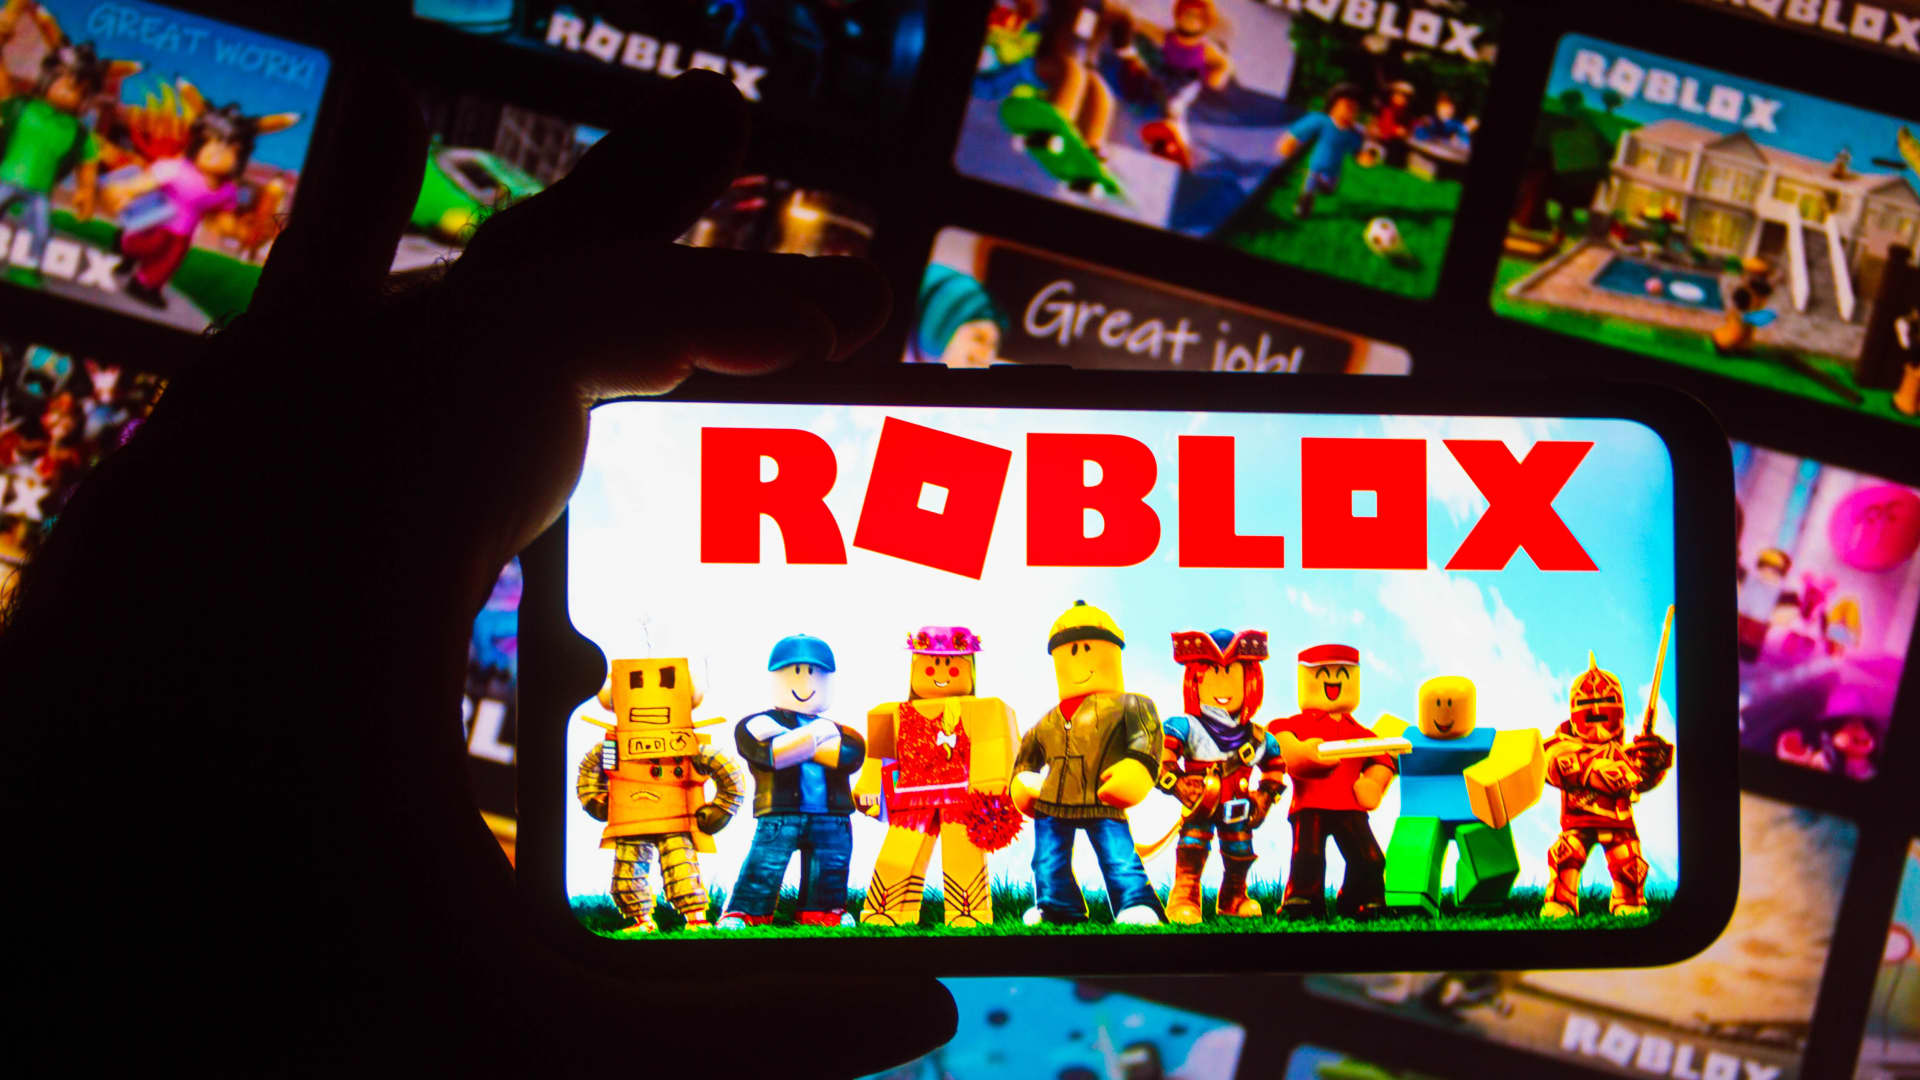 Stocks making the biggest moves midday: Roblox, Continental Resources, Fox Corp and more